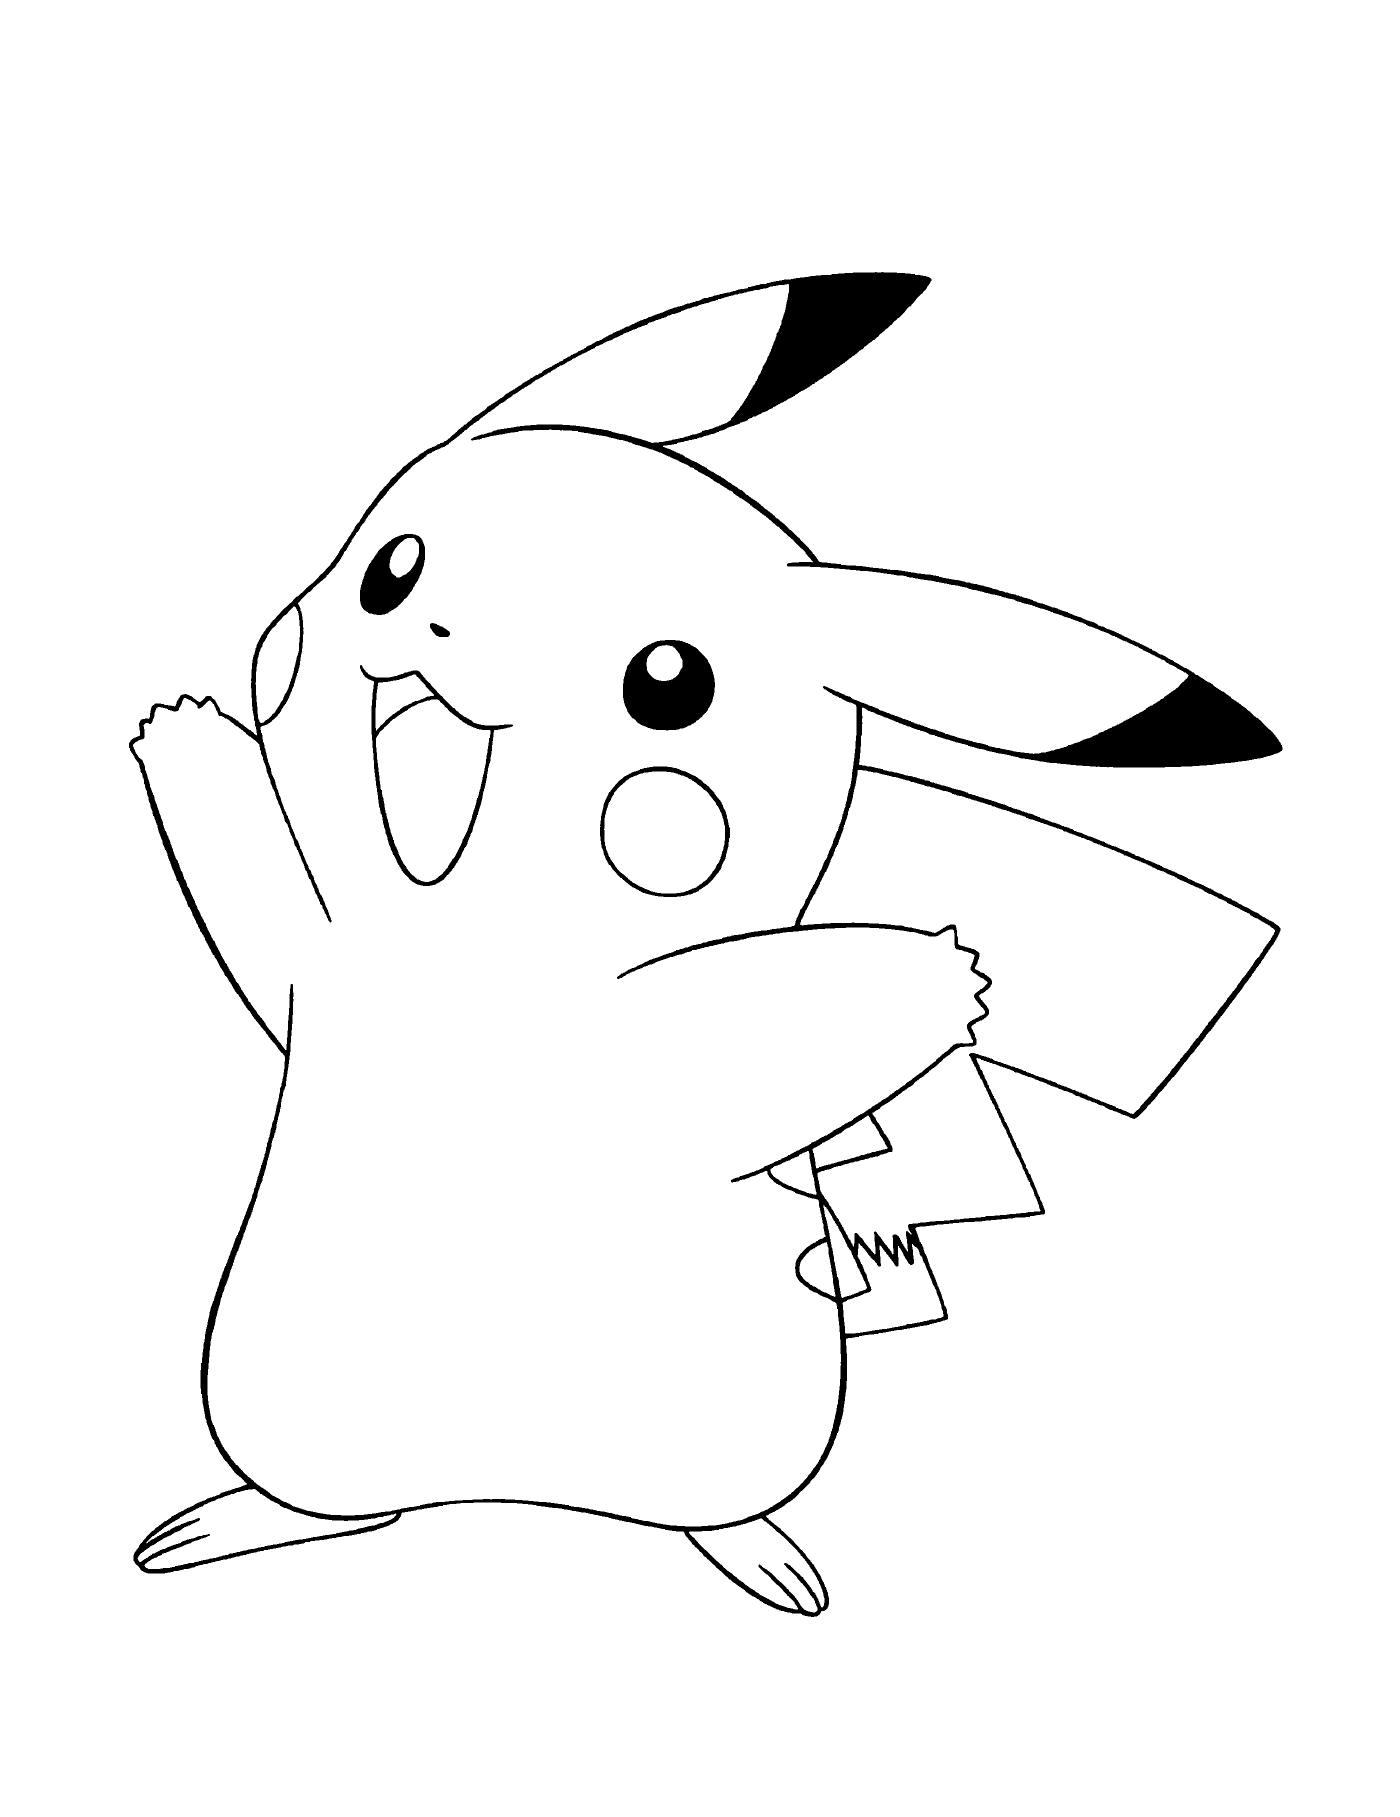  Pikachu, emblematic and endearing 